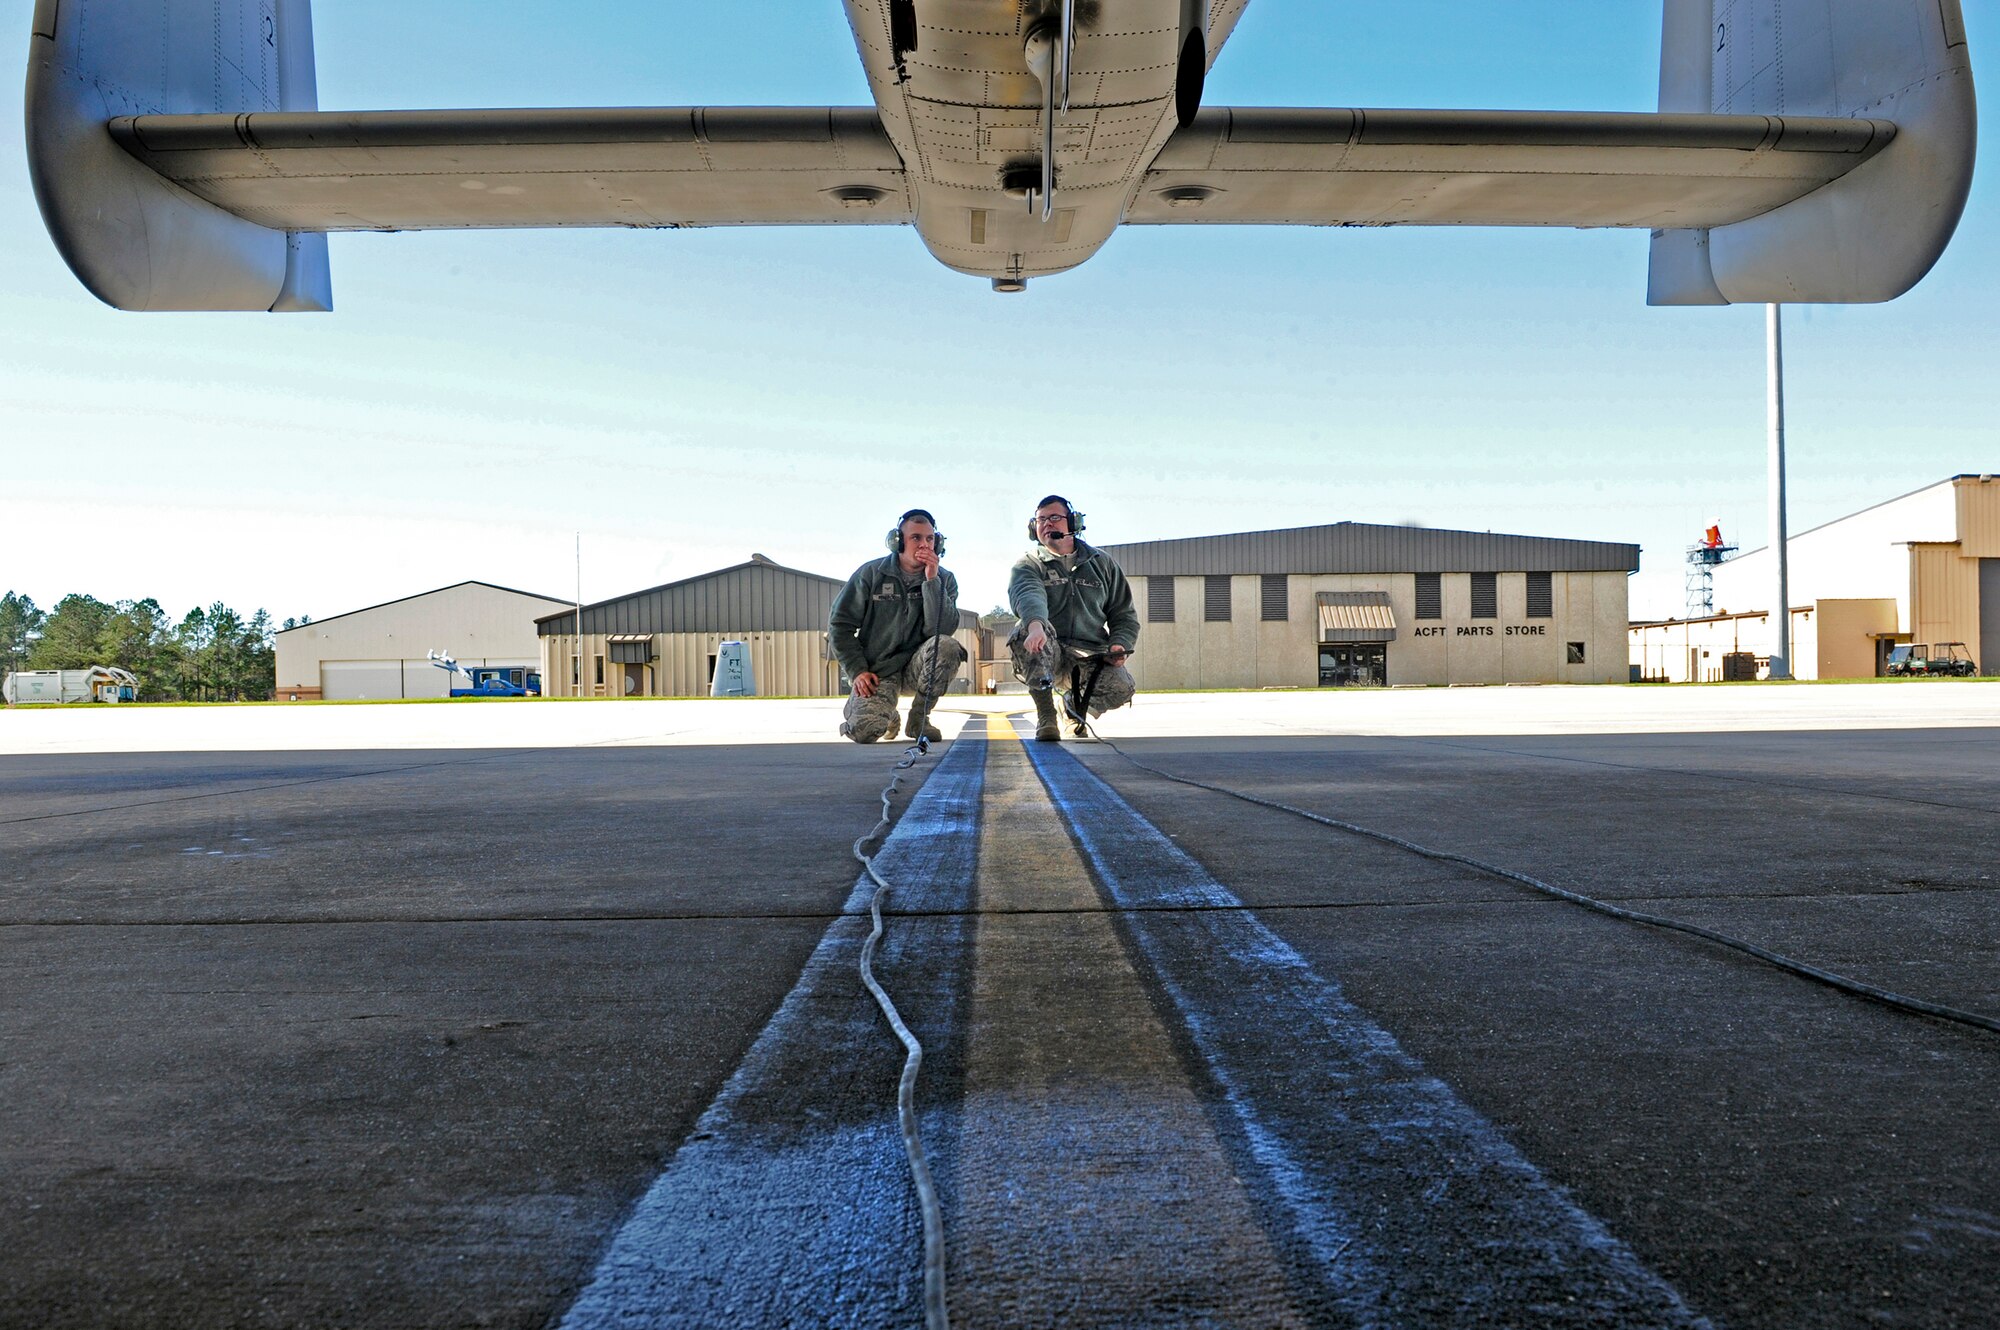 U.S. Air Force Airman 1st Class Chris Renfroe, 74th Aircraft Maintenance Unit crew chief, left, and Senior Airman Tyler Hester, 476th Maintenance Squadron crew chief, perform a flight control check on an A-10C Thunderbolt II prior to launching, Jan. 5, 2016, at Moody Air Force Base, Ga. The crew chiefs perform aircraft launches with pilots regularly to keep them qualified. (U.S. Air Force photo by Airman 1st Class Kathleen D. Bryant/Released)

